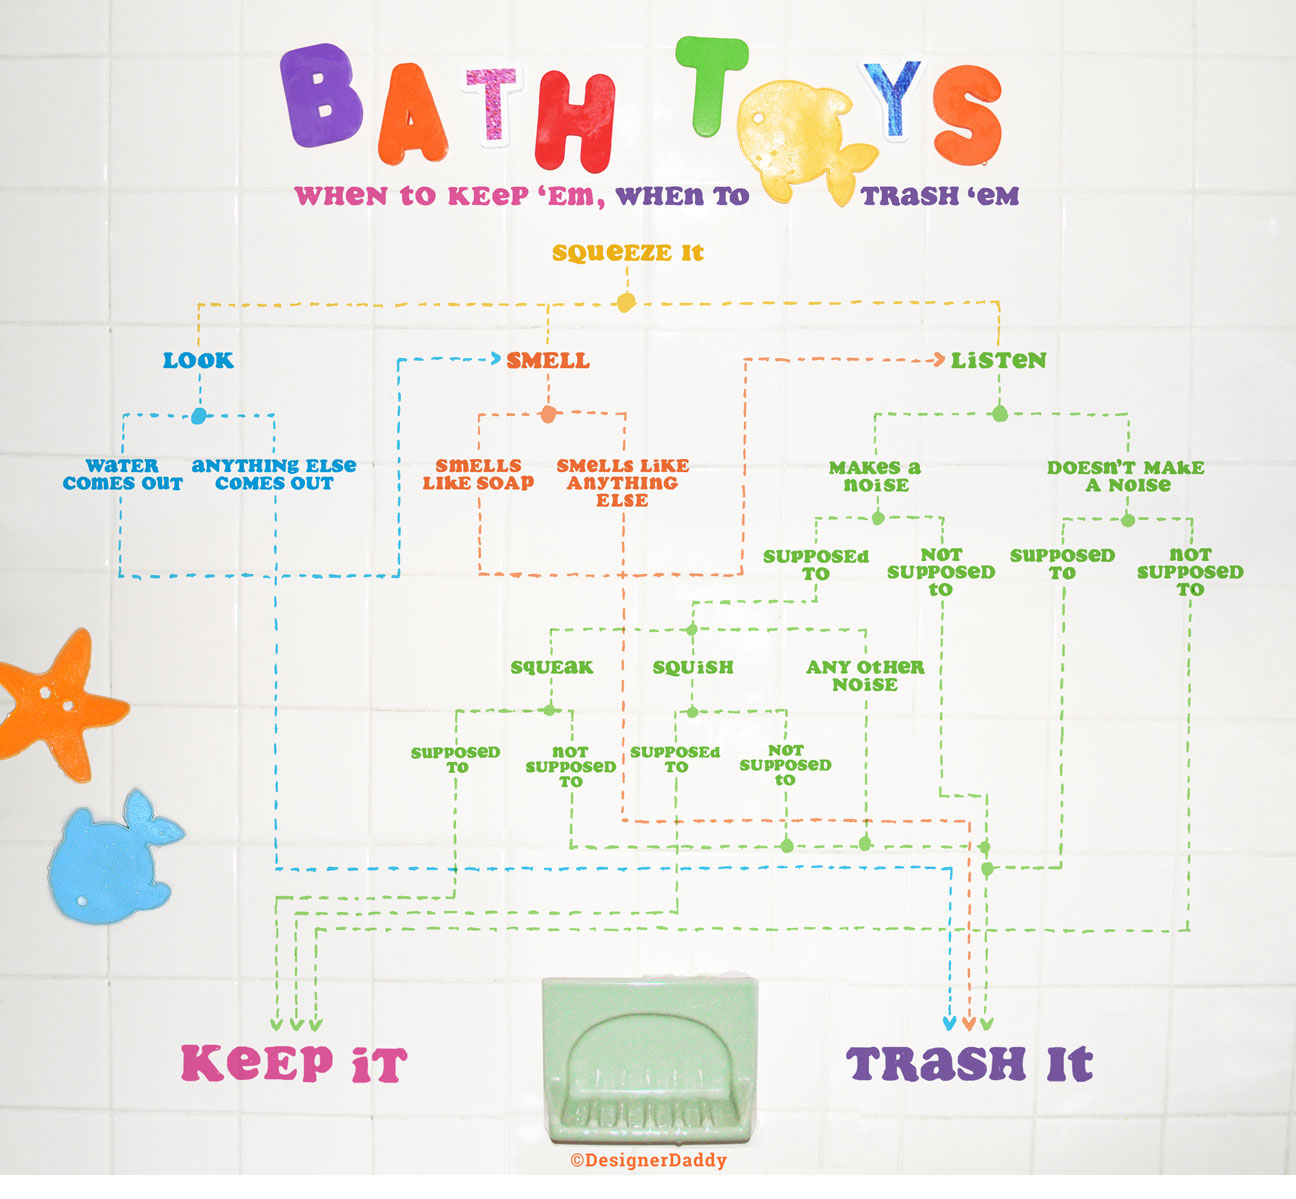 bath toys when to keep, when to trash